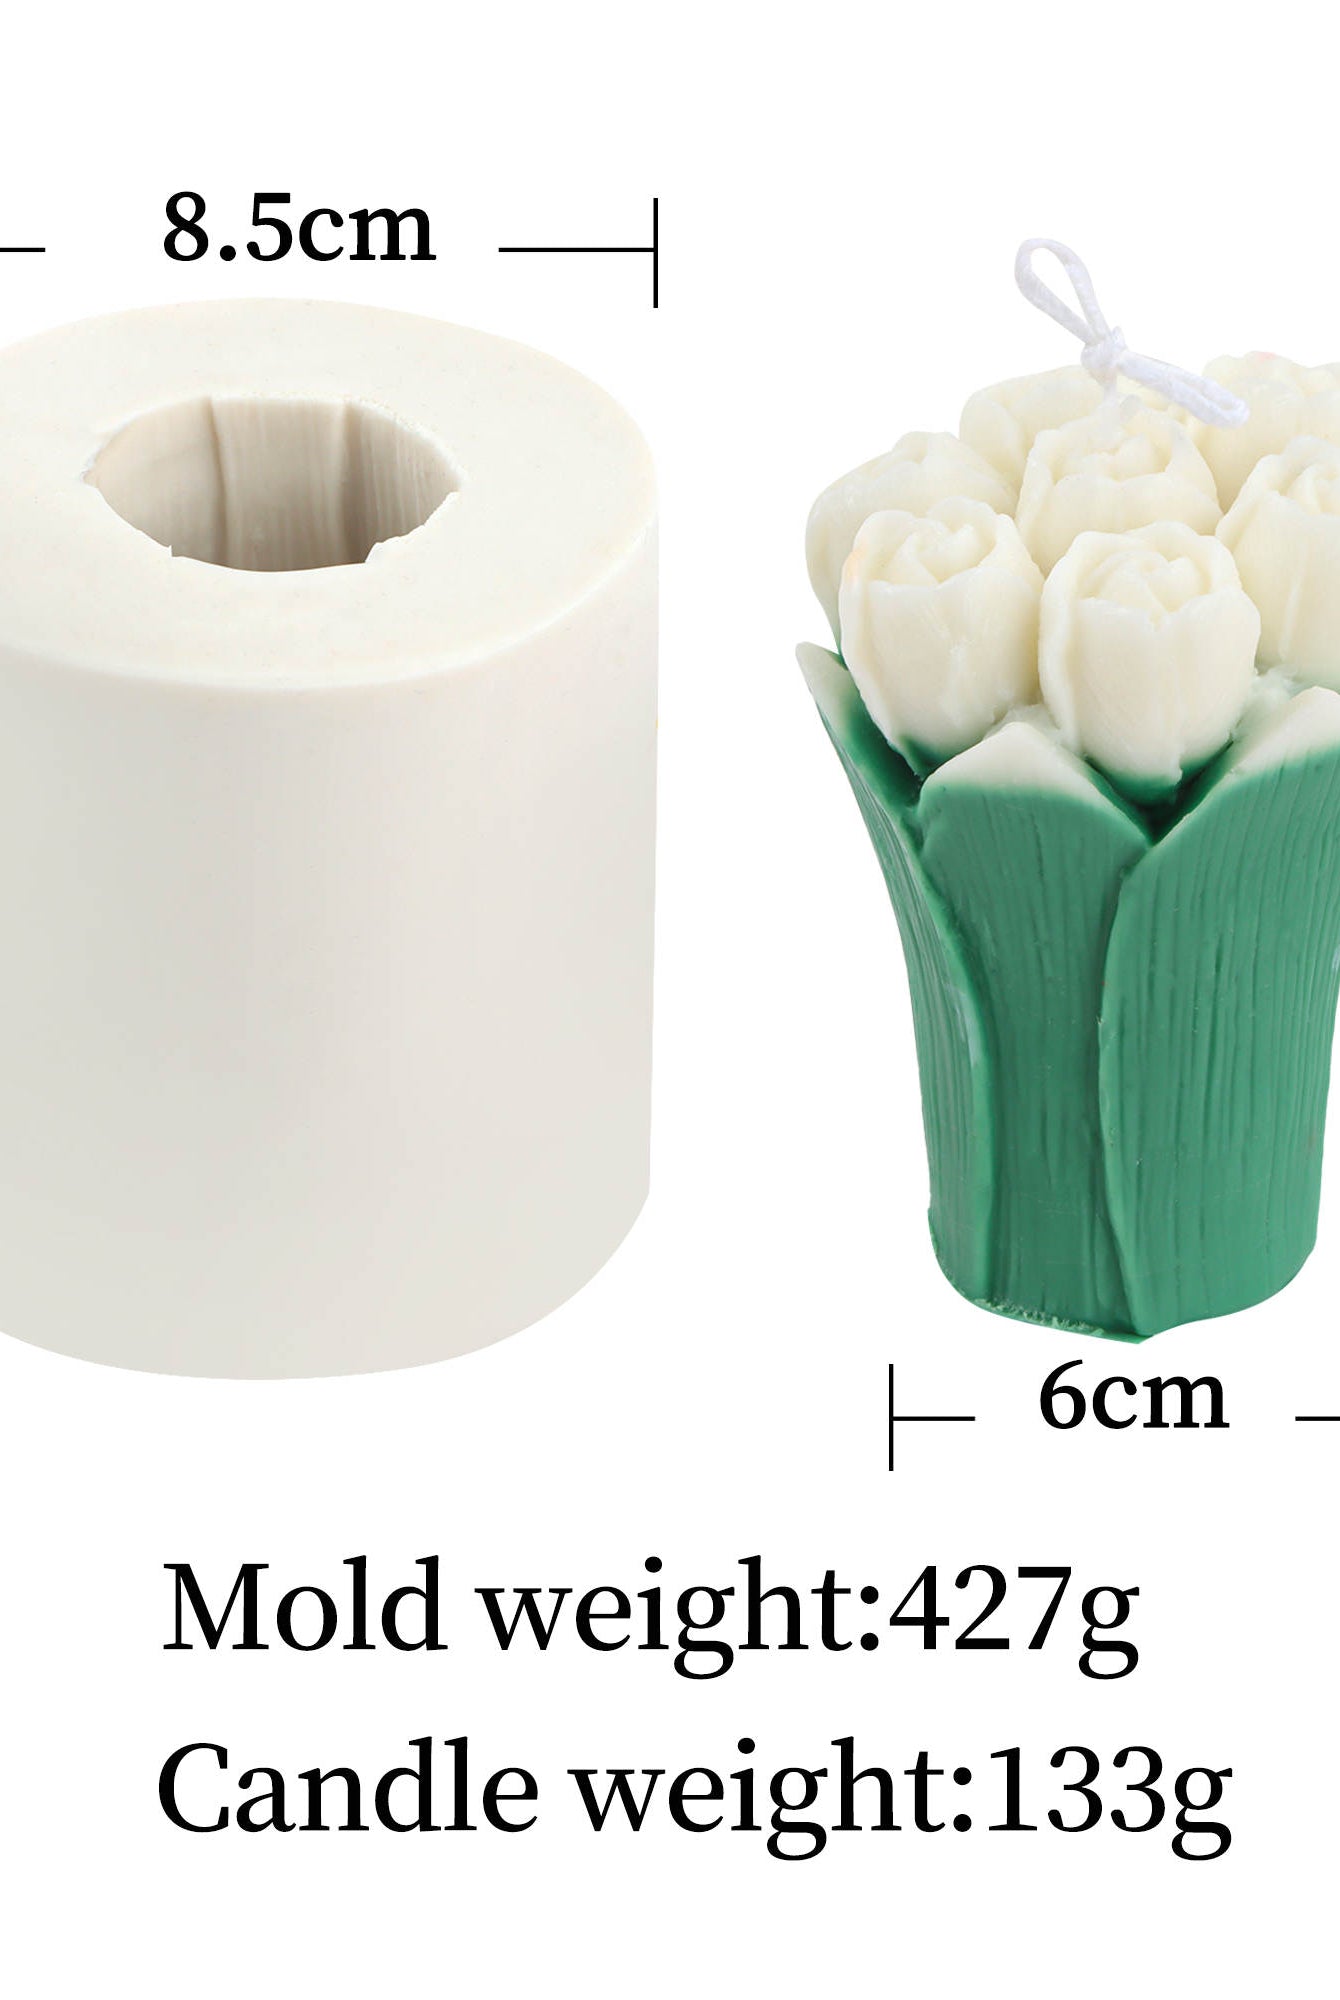 Tulip Bouquet Candle Mould 4 - Silicone Mould, Mold for DIY Candles. Created using candle making kit with cotton candle wicks and candle colour chips. Using soy wax for pillar candles. Sold by Myka Candles Moulds Australia